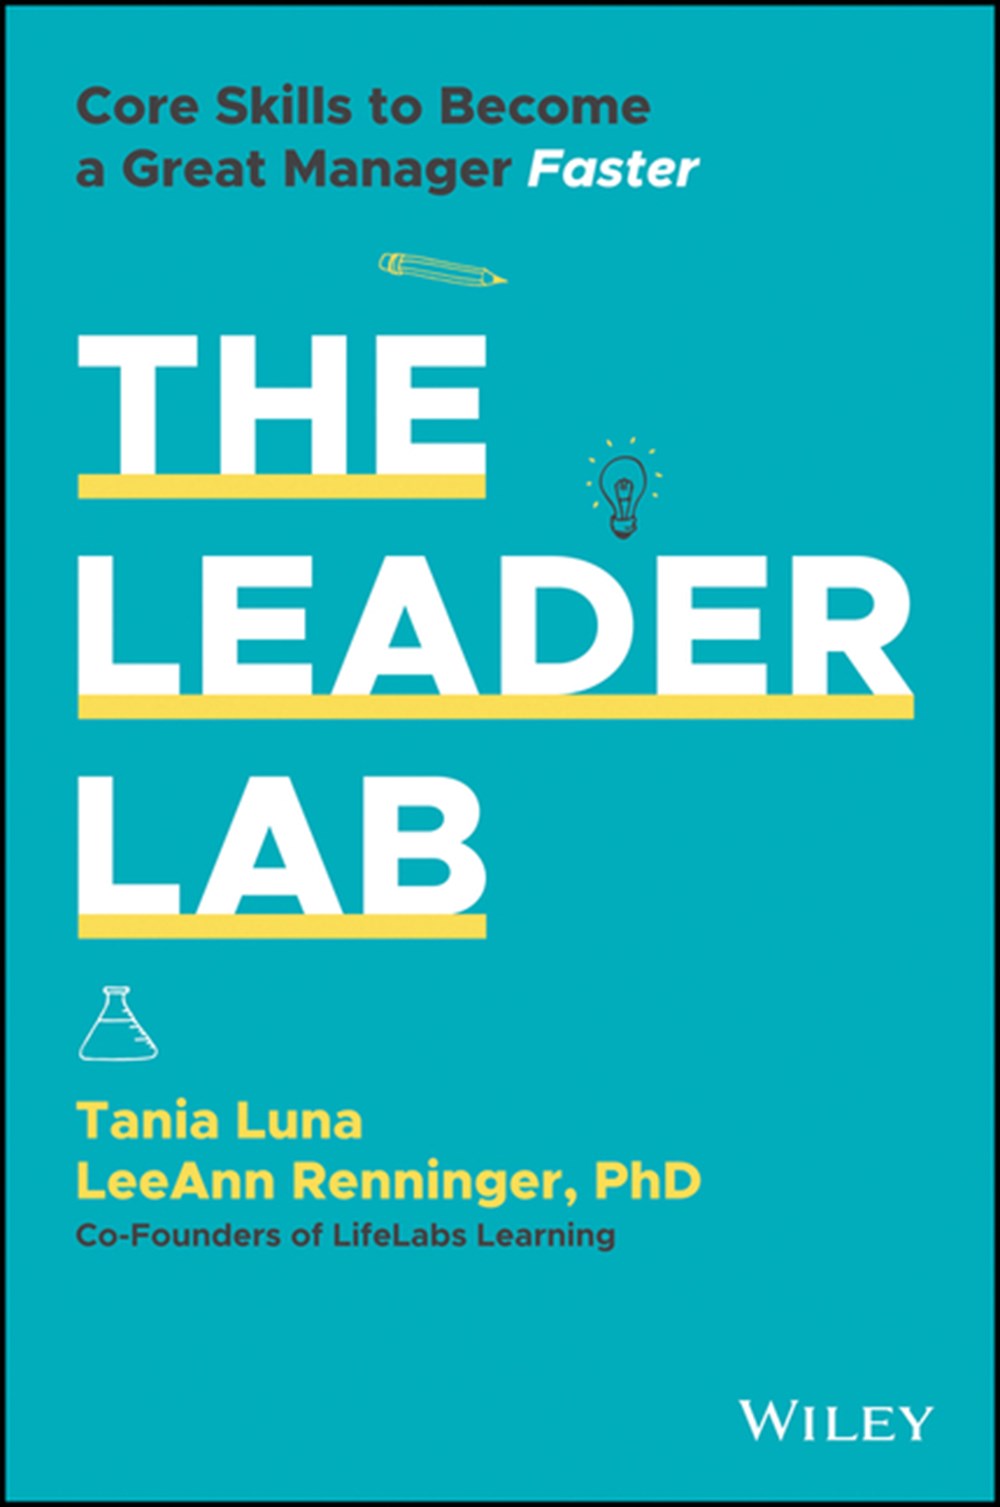 Leader Lab Core Skills to Become a Great Manager, Faster